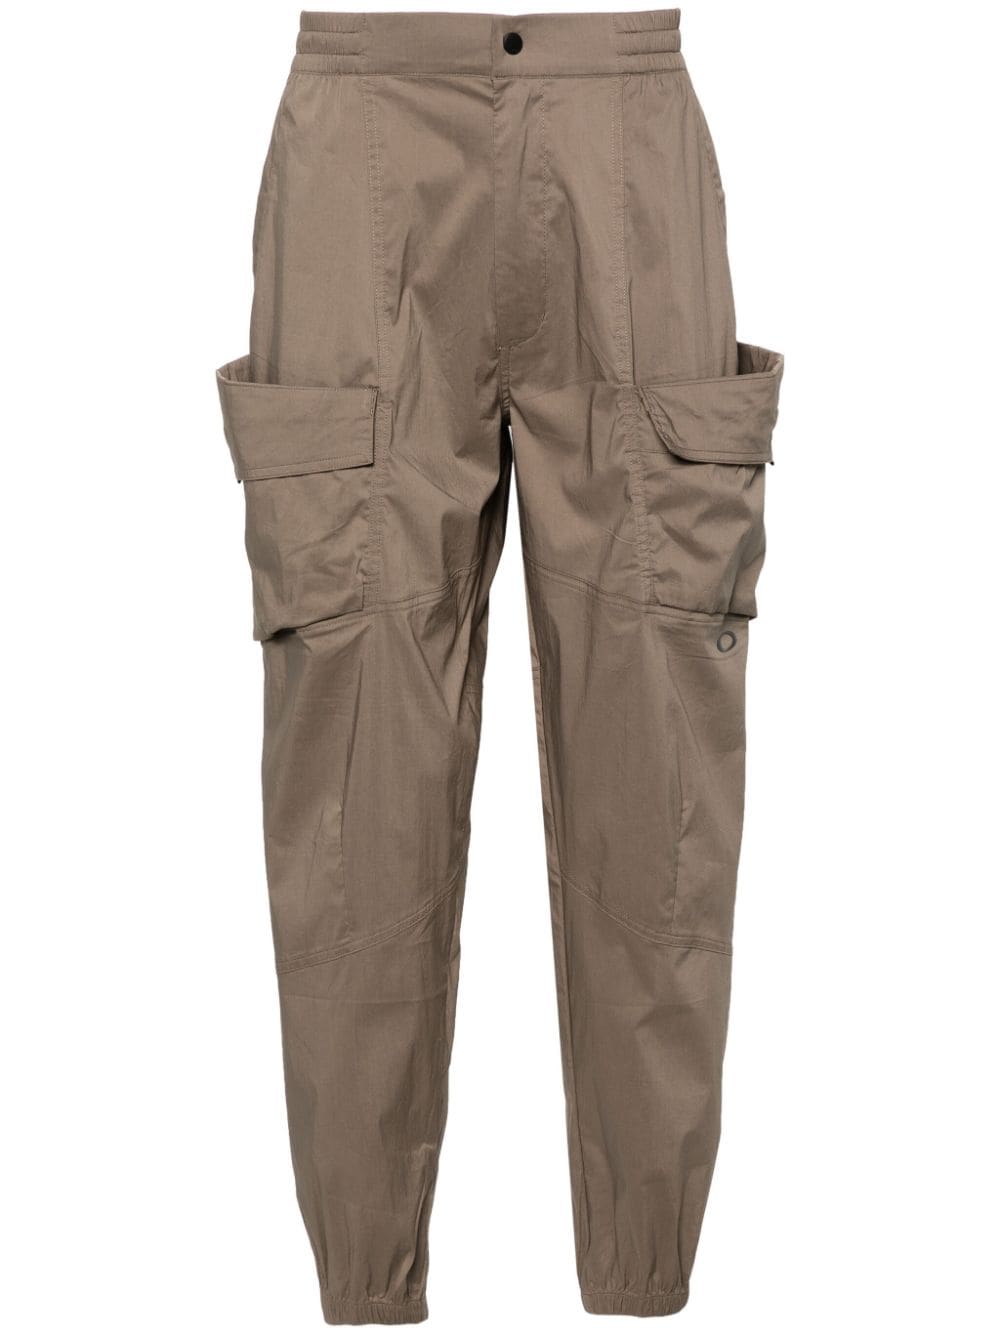 FGL Tool Box cargo trousers<BR/><BR/><BR/>